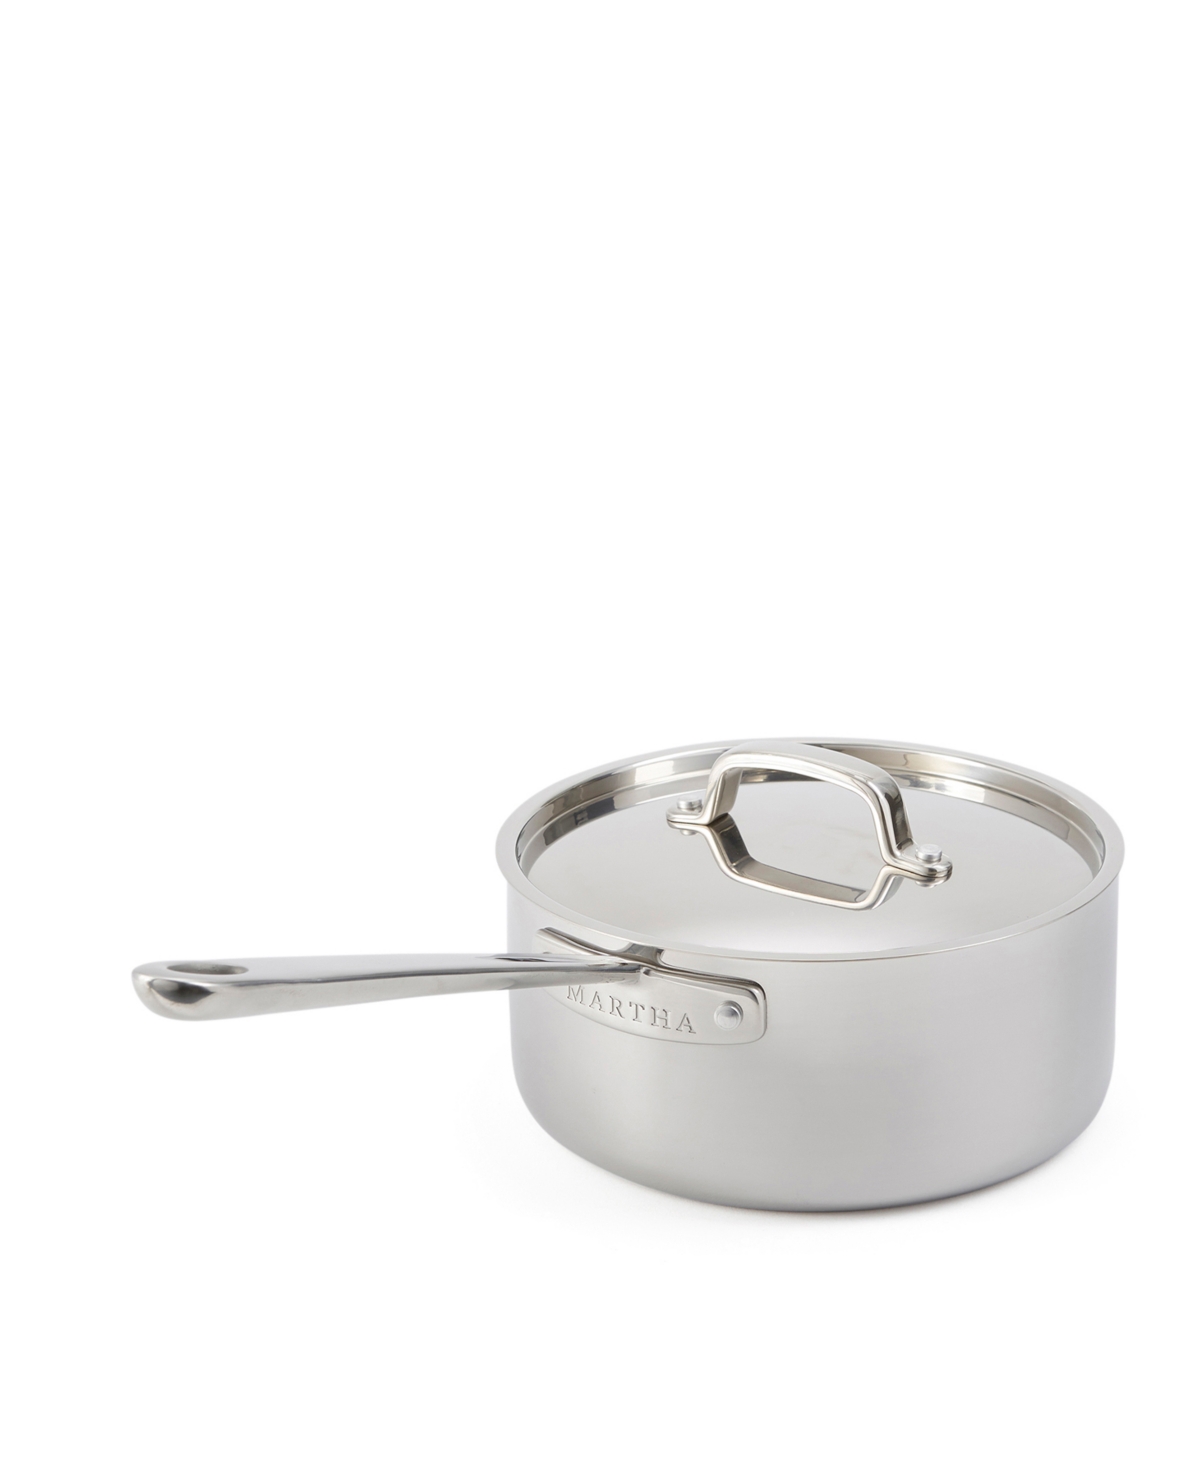 Martha Stewart Collection Stainless Steel 3 Qt Low Saucepan With Lid In Metallic